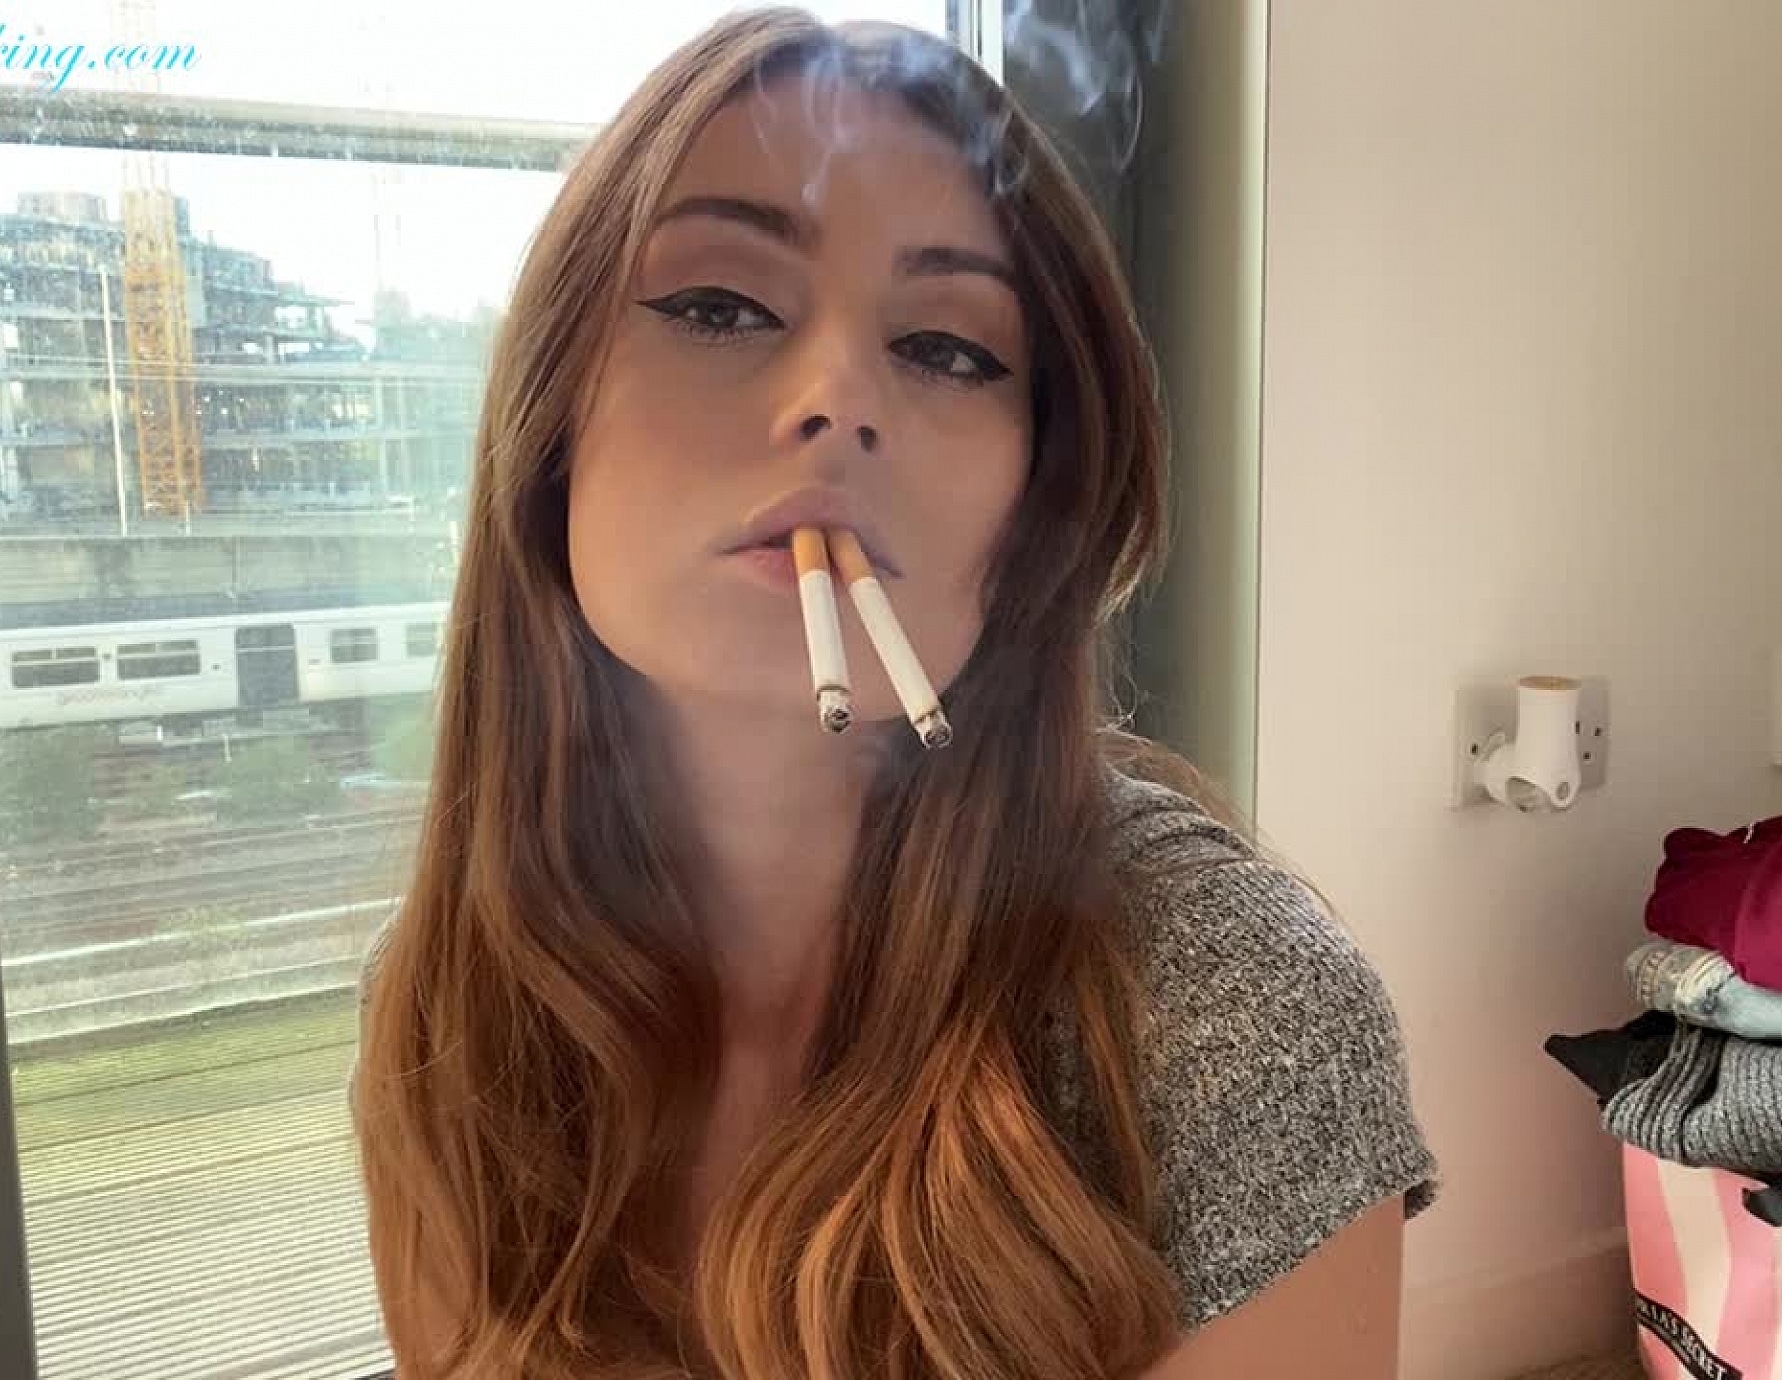 Smoking 2 Cigarettes At Once With Lots Of Dangling Anna